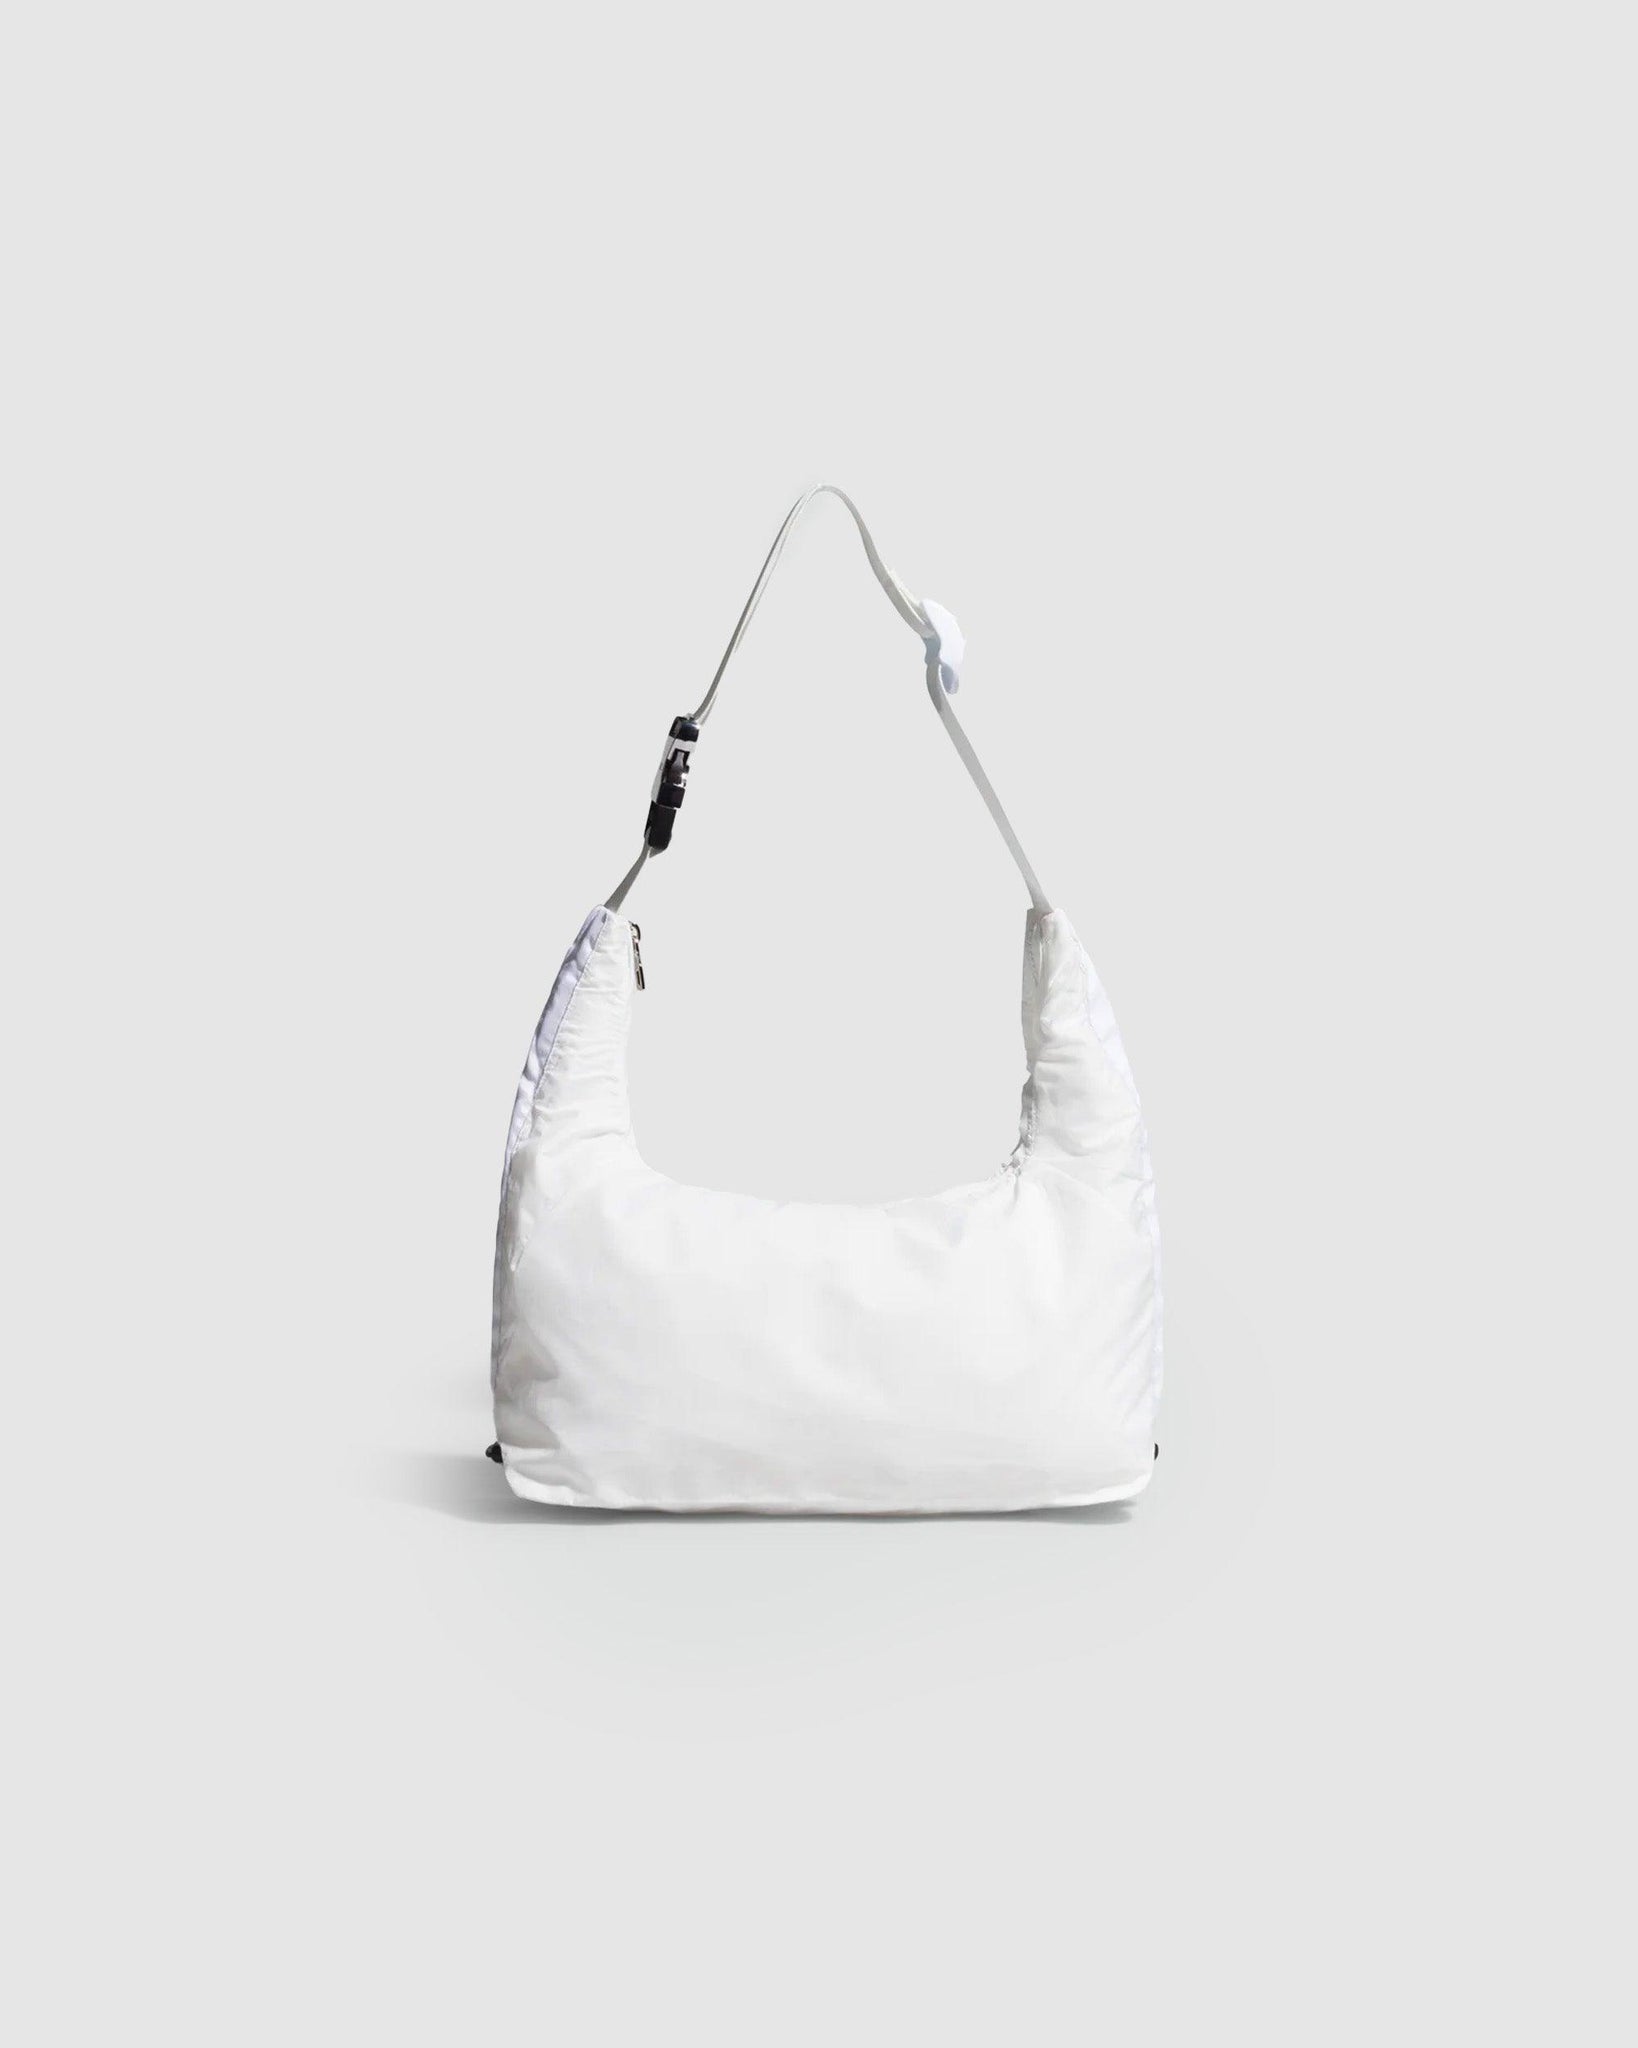 Little Hey Sling Bag Parachute - {{ collection.title }} - Chinatown Country Club 